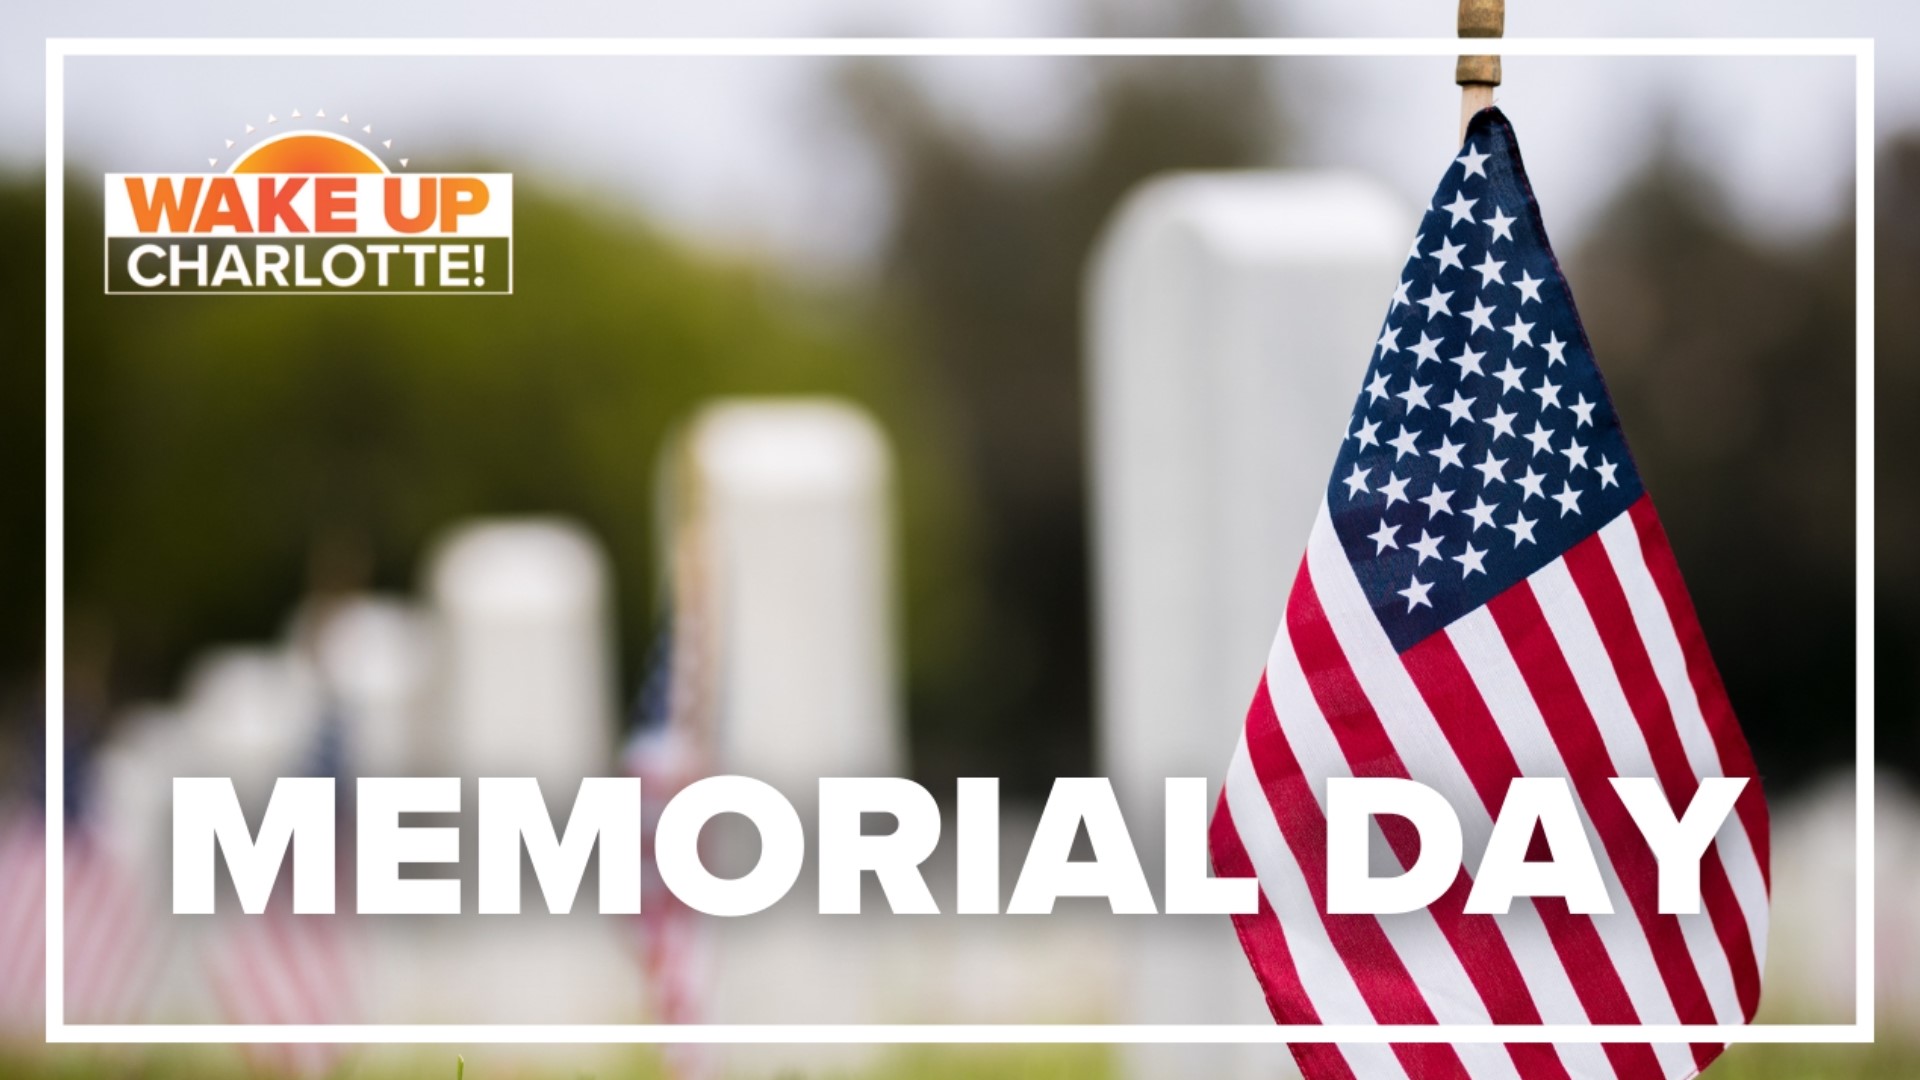 It initially honored only those killed in the Civil War, but during WWI, the holiday evolved to honor those killed in all wars.